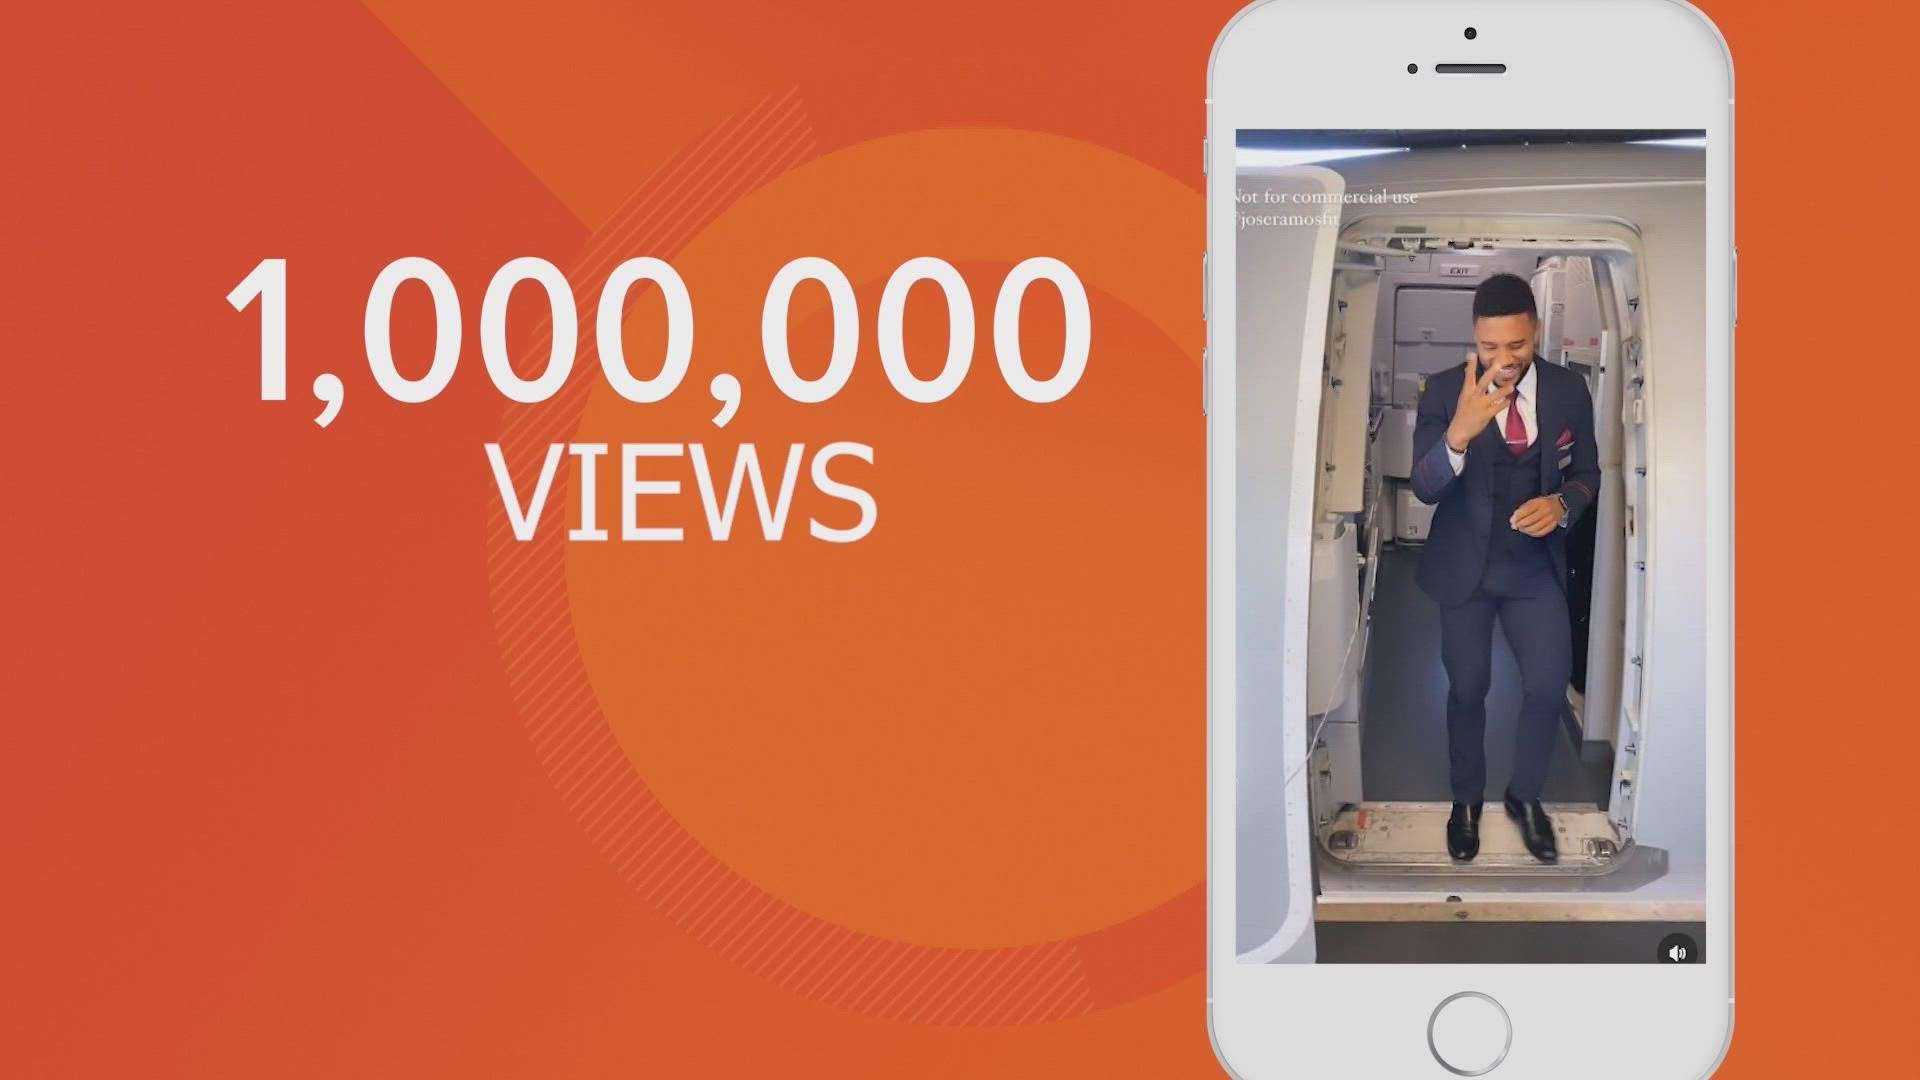 He's a dancing flight attendant with more than a million views on social media.